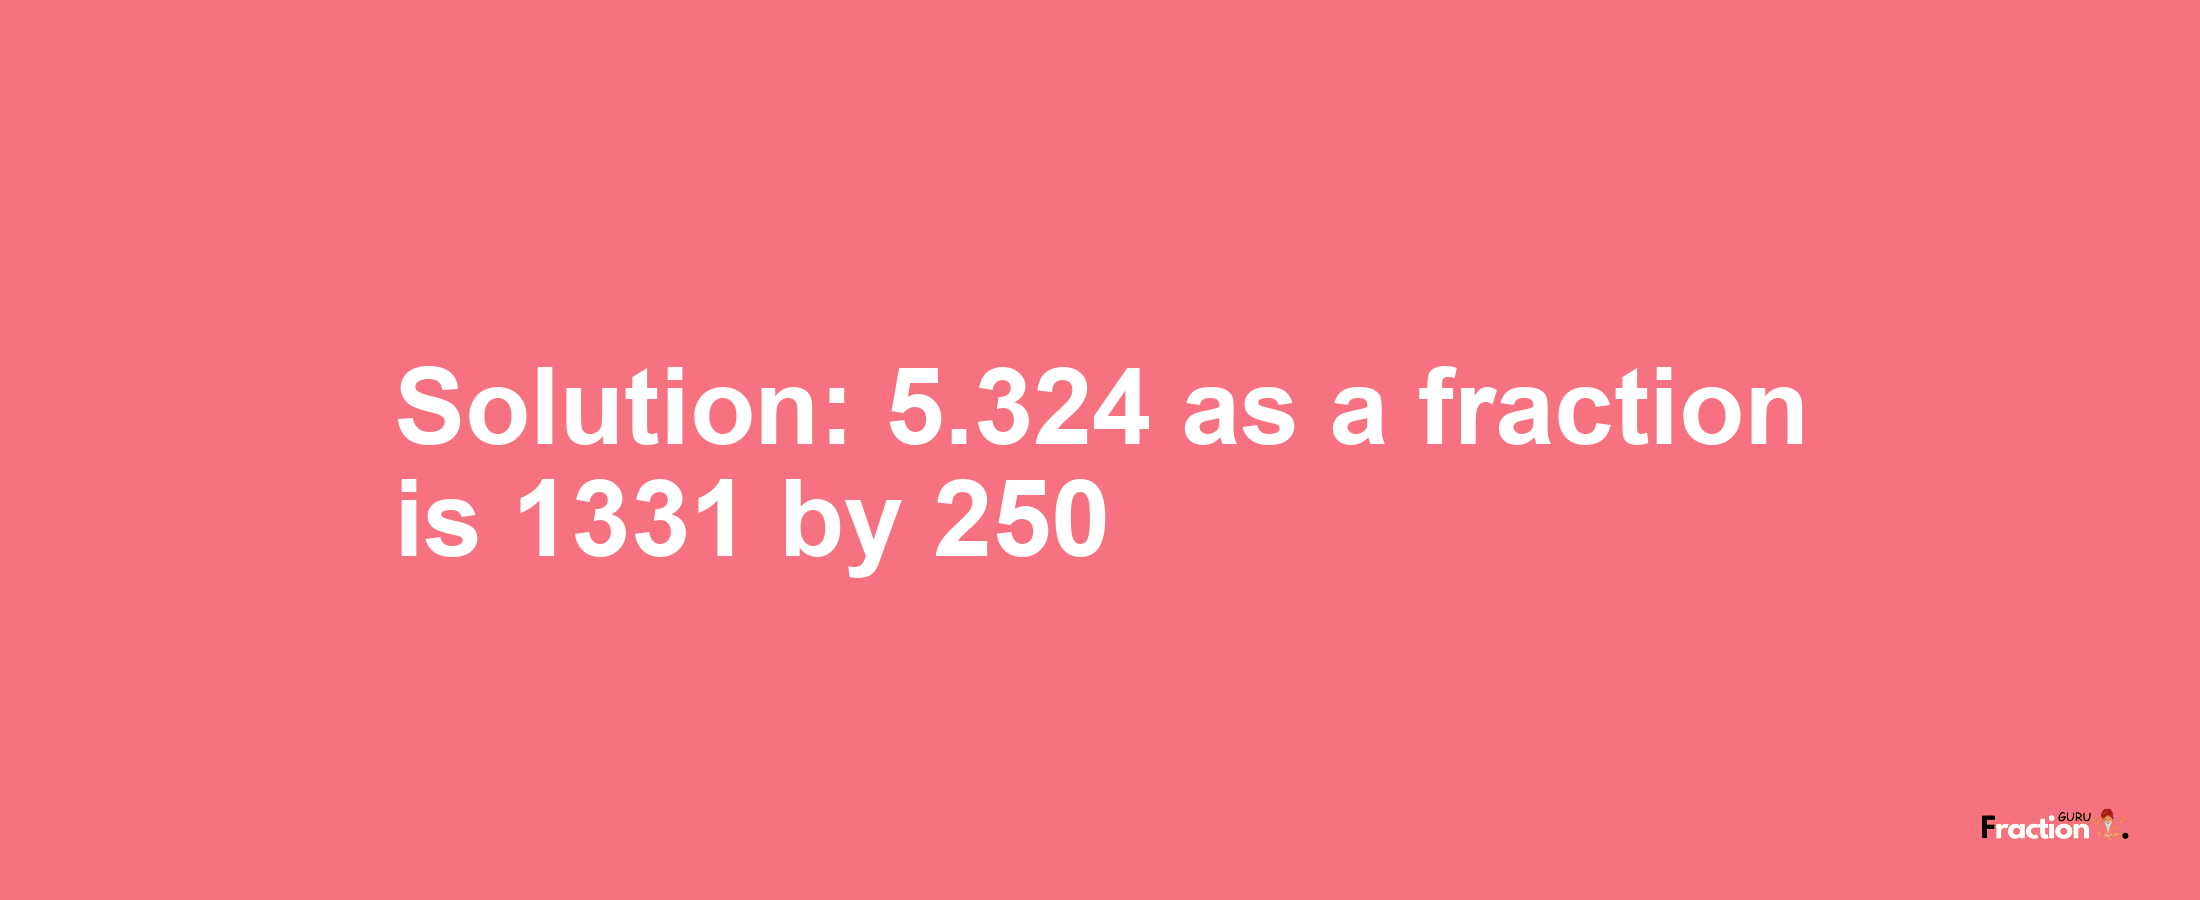 Solution:5.324 as a fraction is 1331/250